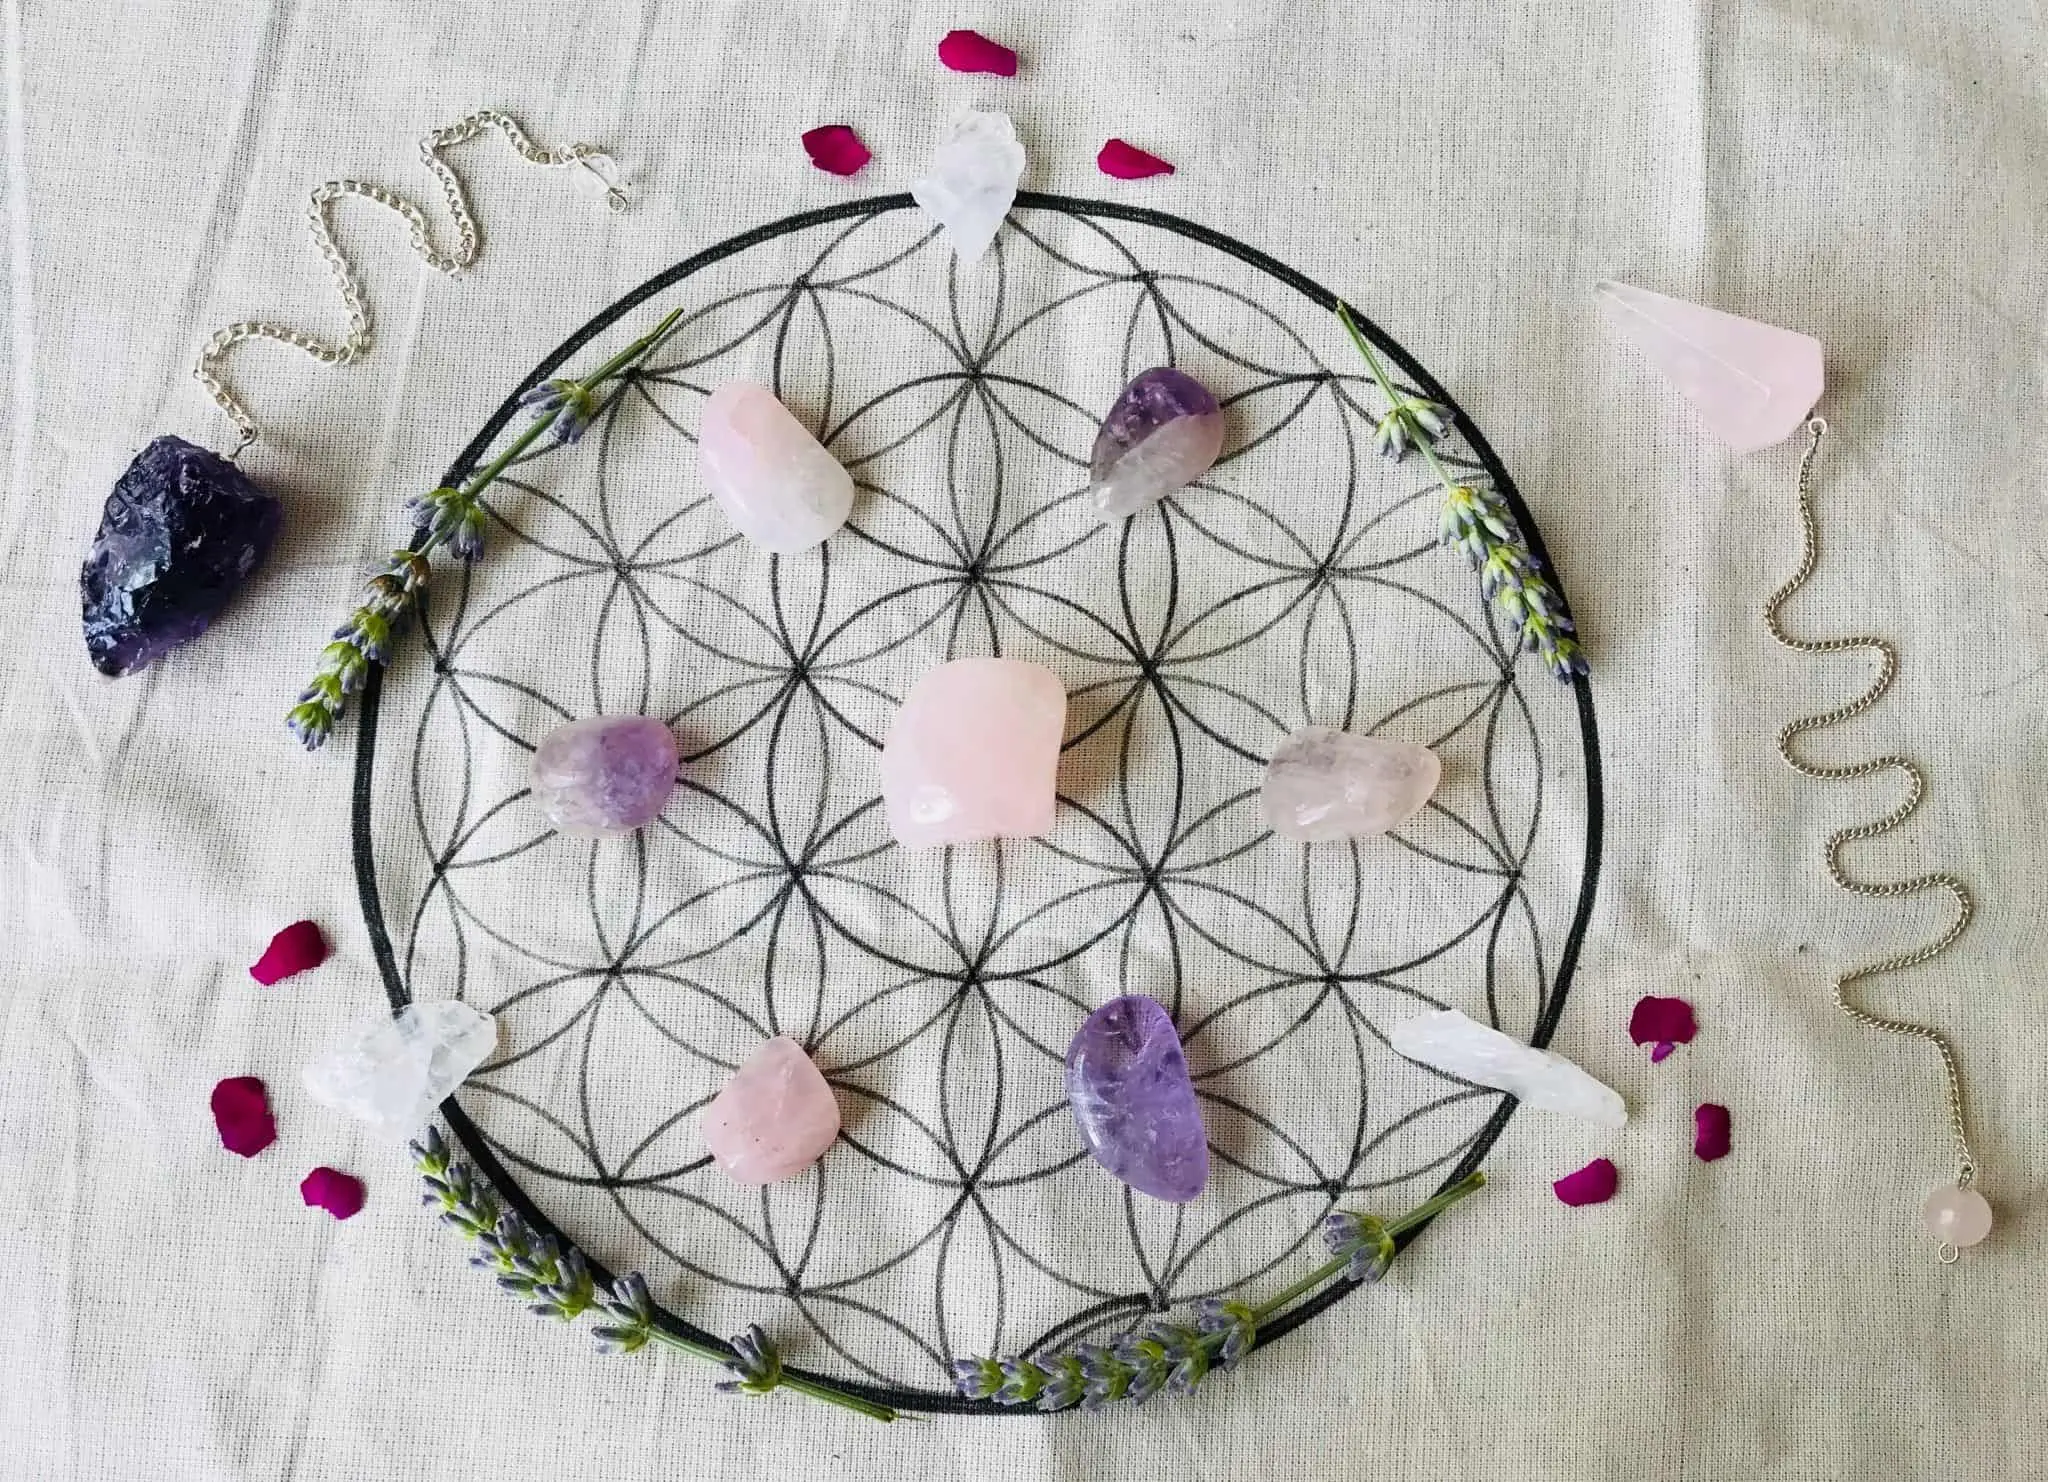 Hand Drawn Crystal Grid With Assortment Of Crystals At Surrendertohappiness.Com